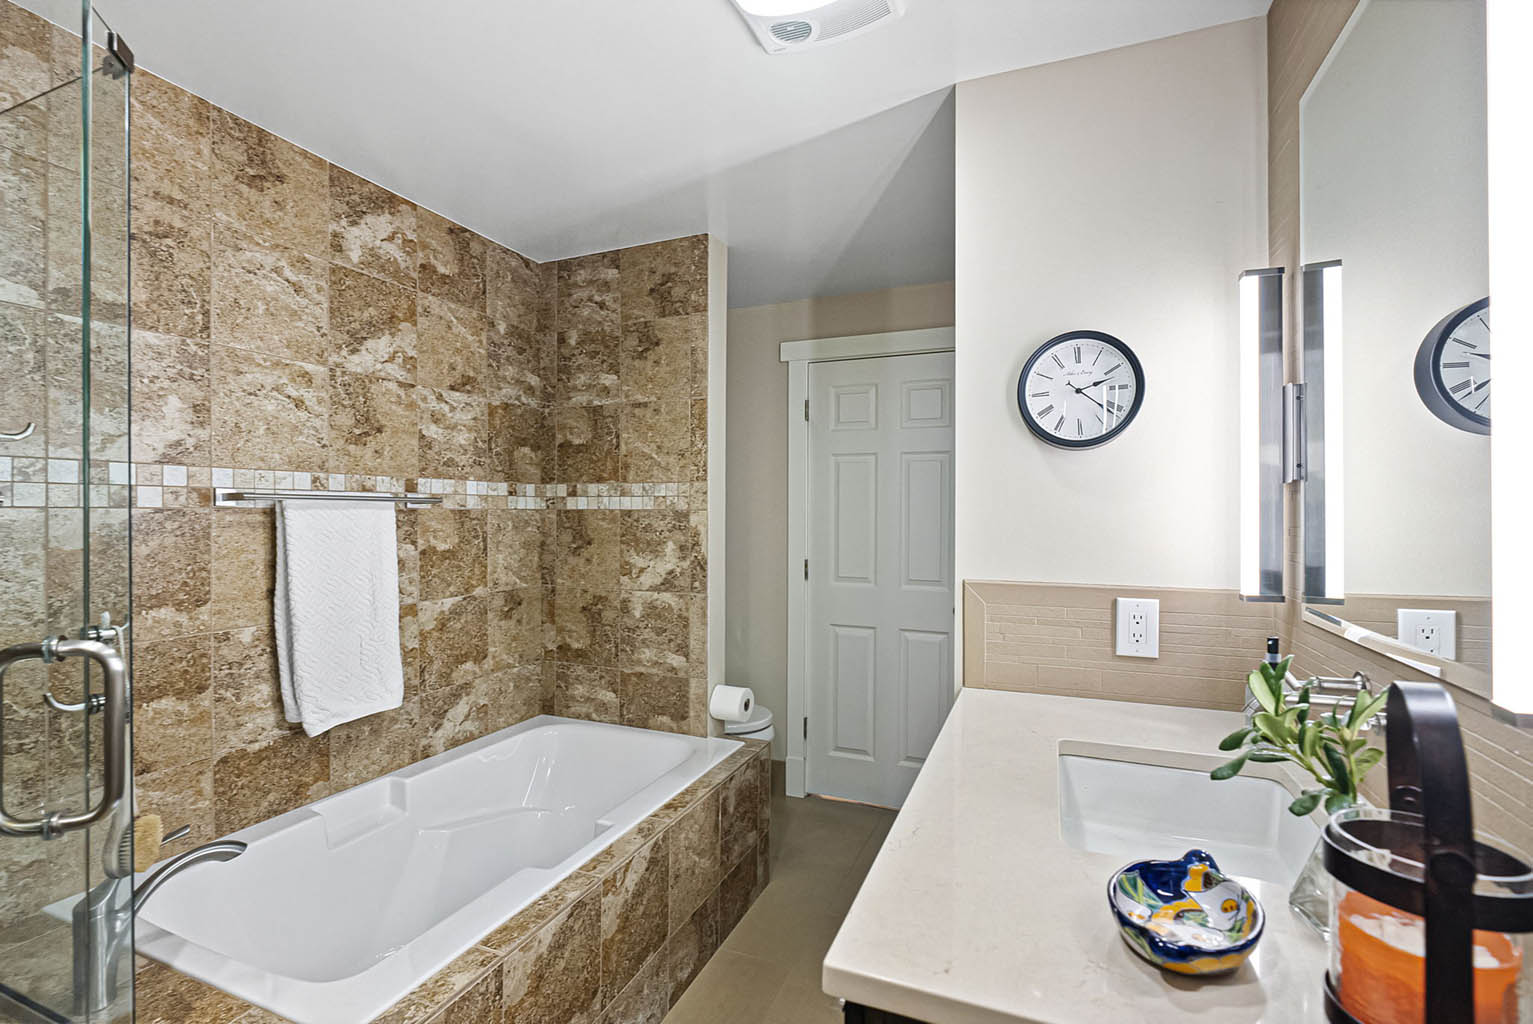 Primary bathroom with soaking tub is accessible from the hall